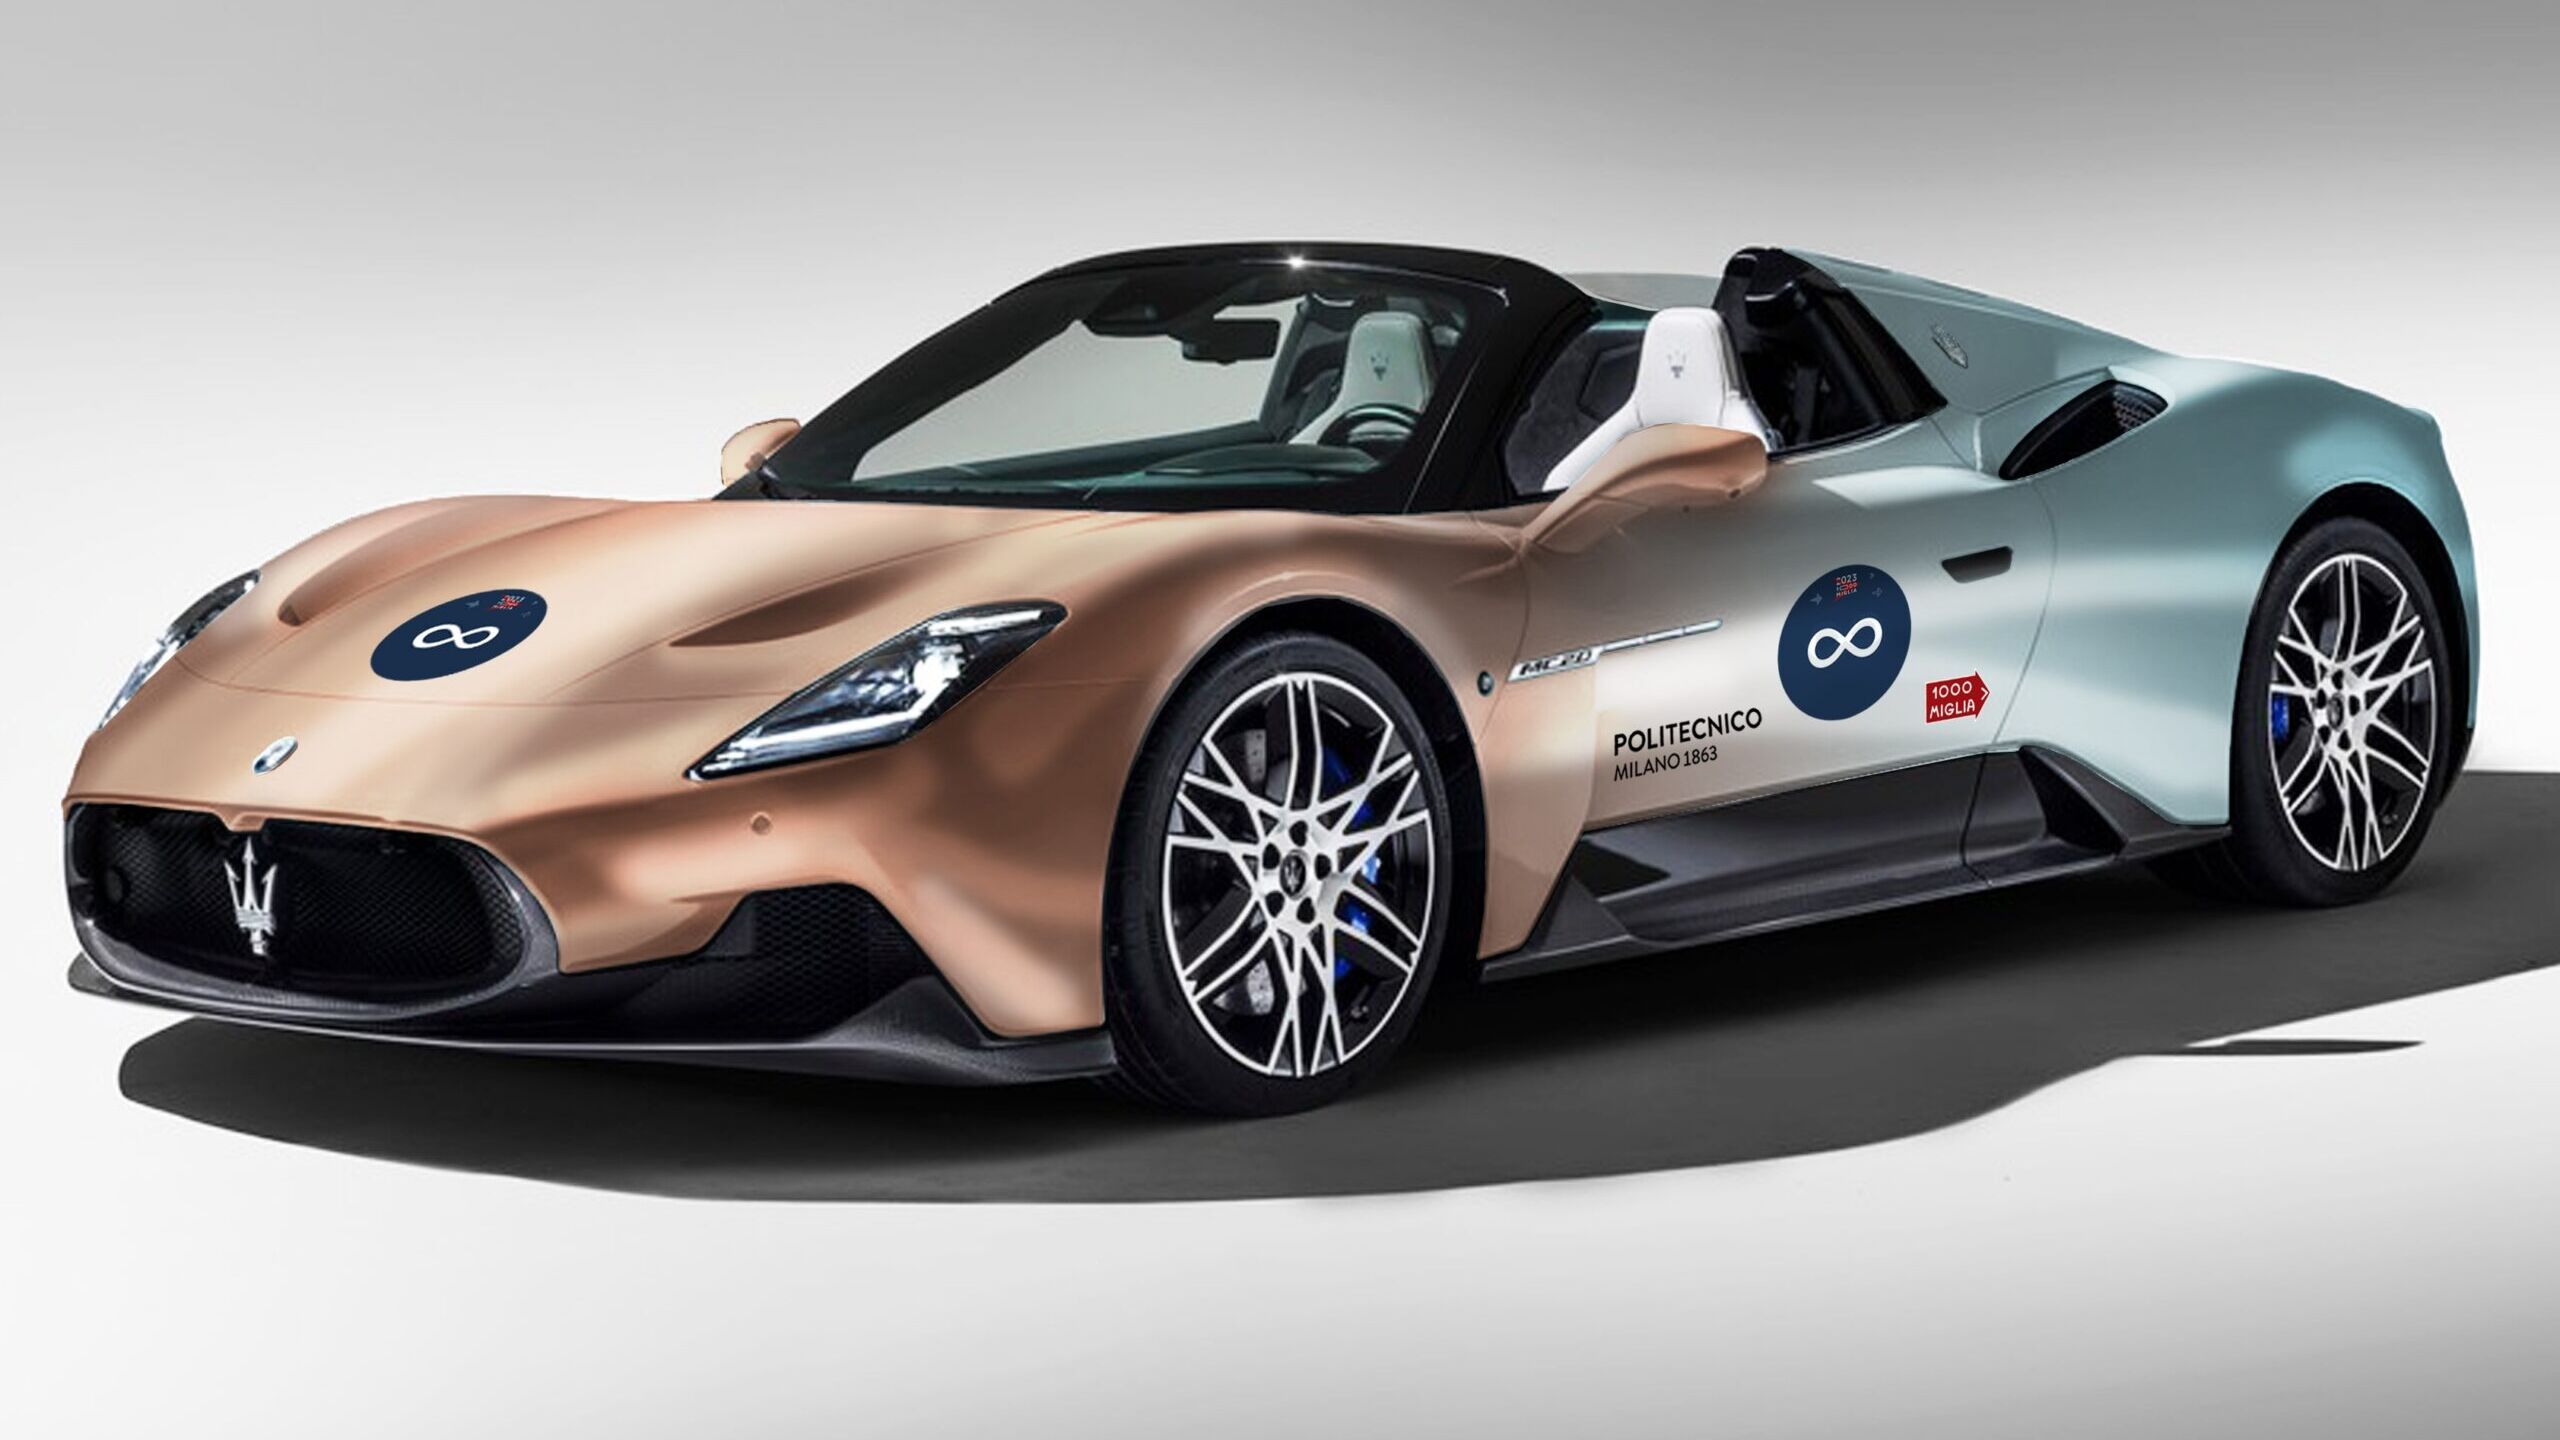 Autonomous driving: the livery of the Maserati MC20 Cielo "robo-driver" set up by the Milan Polytechnic